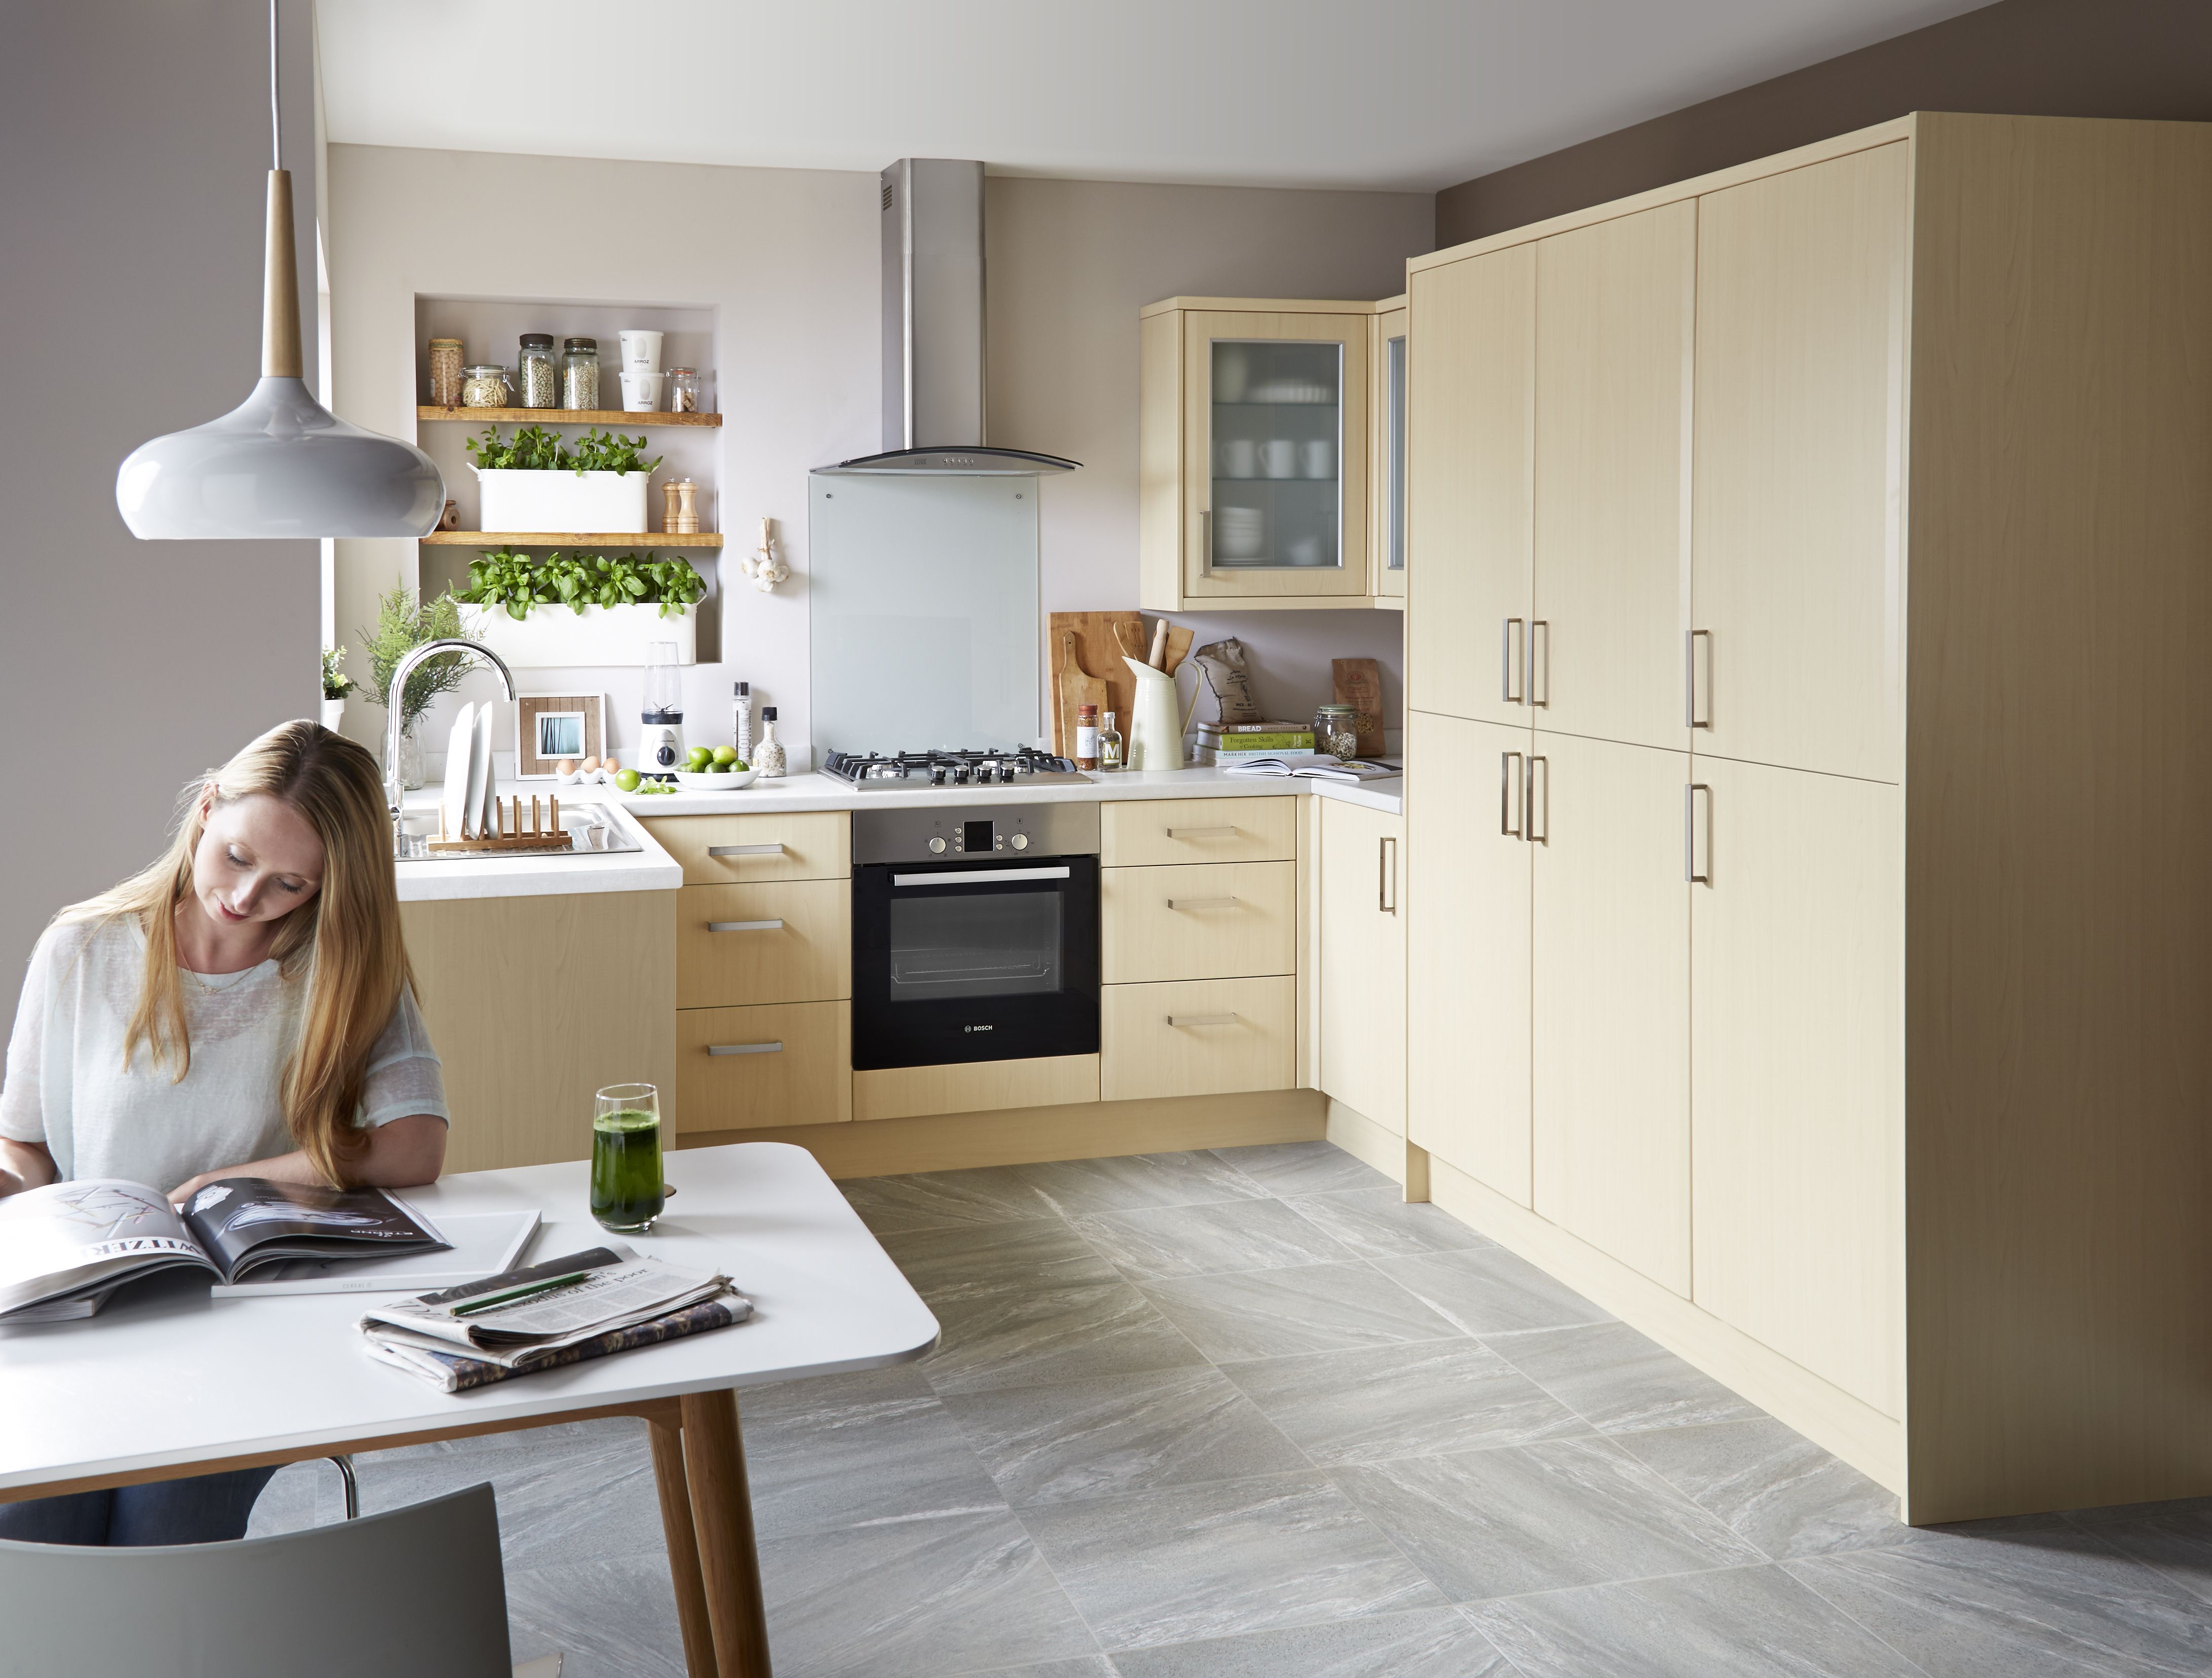 How to prepare for a B&Q kitchen design appointment | Ideas & Advice